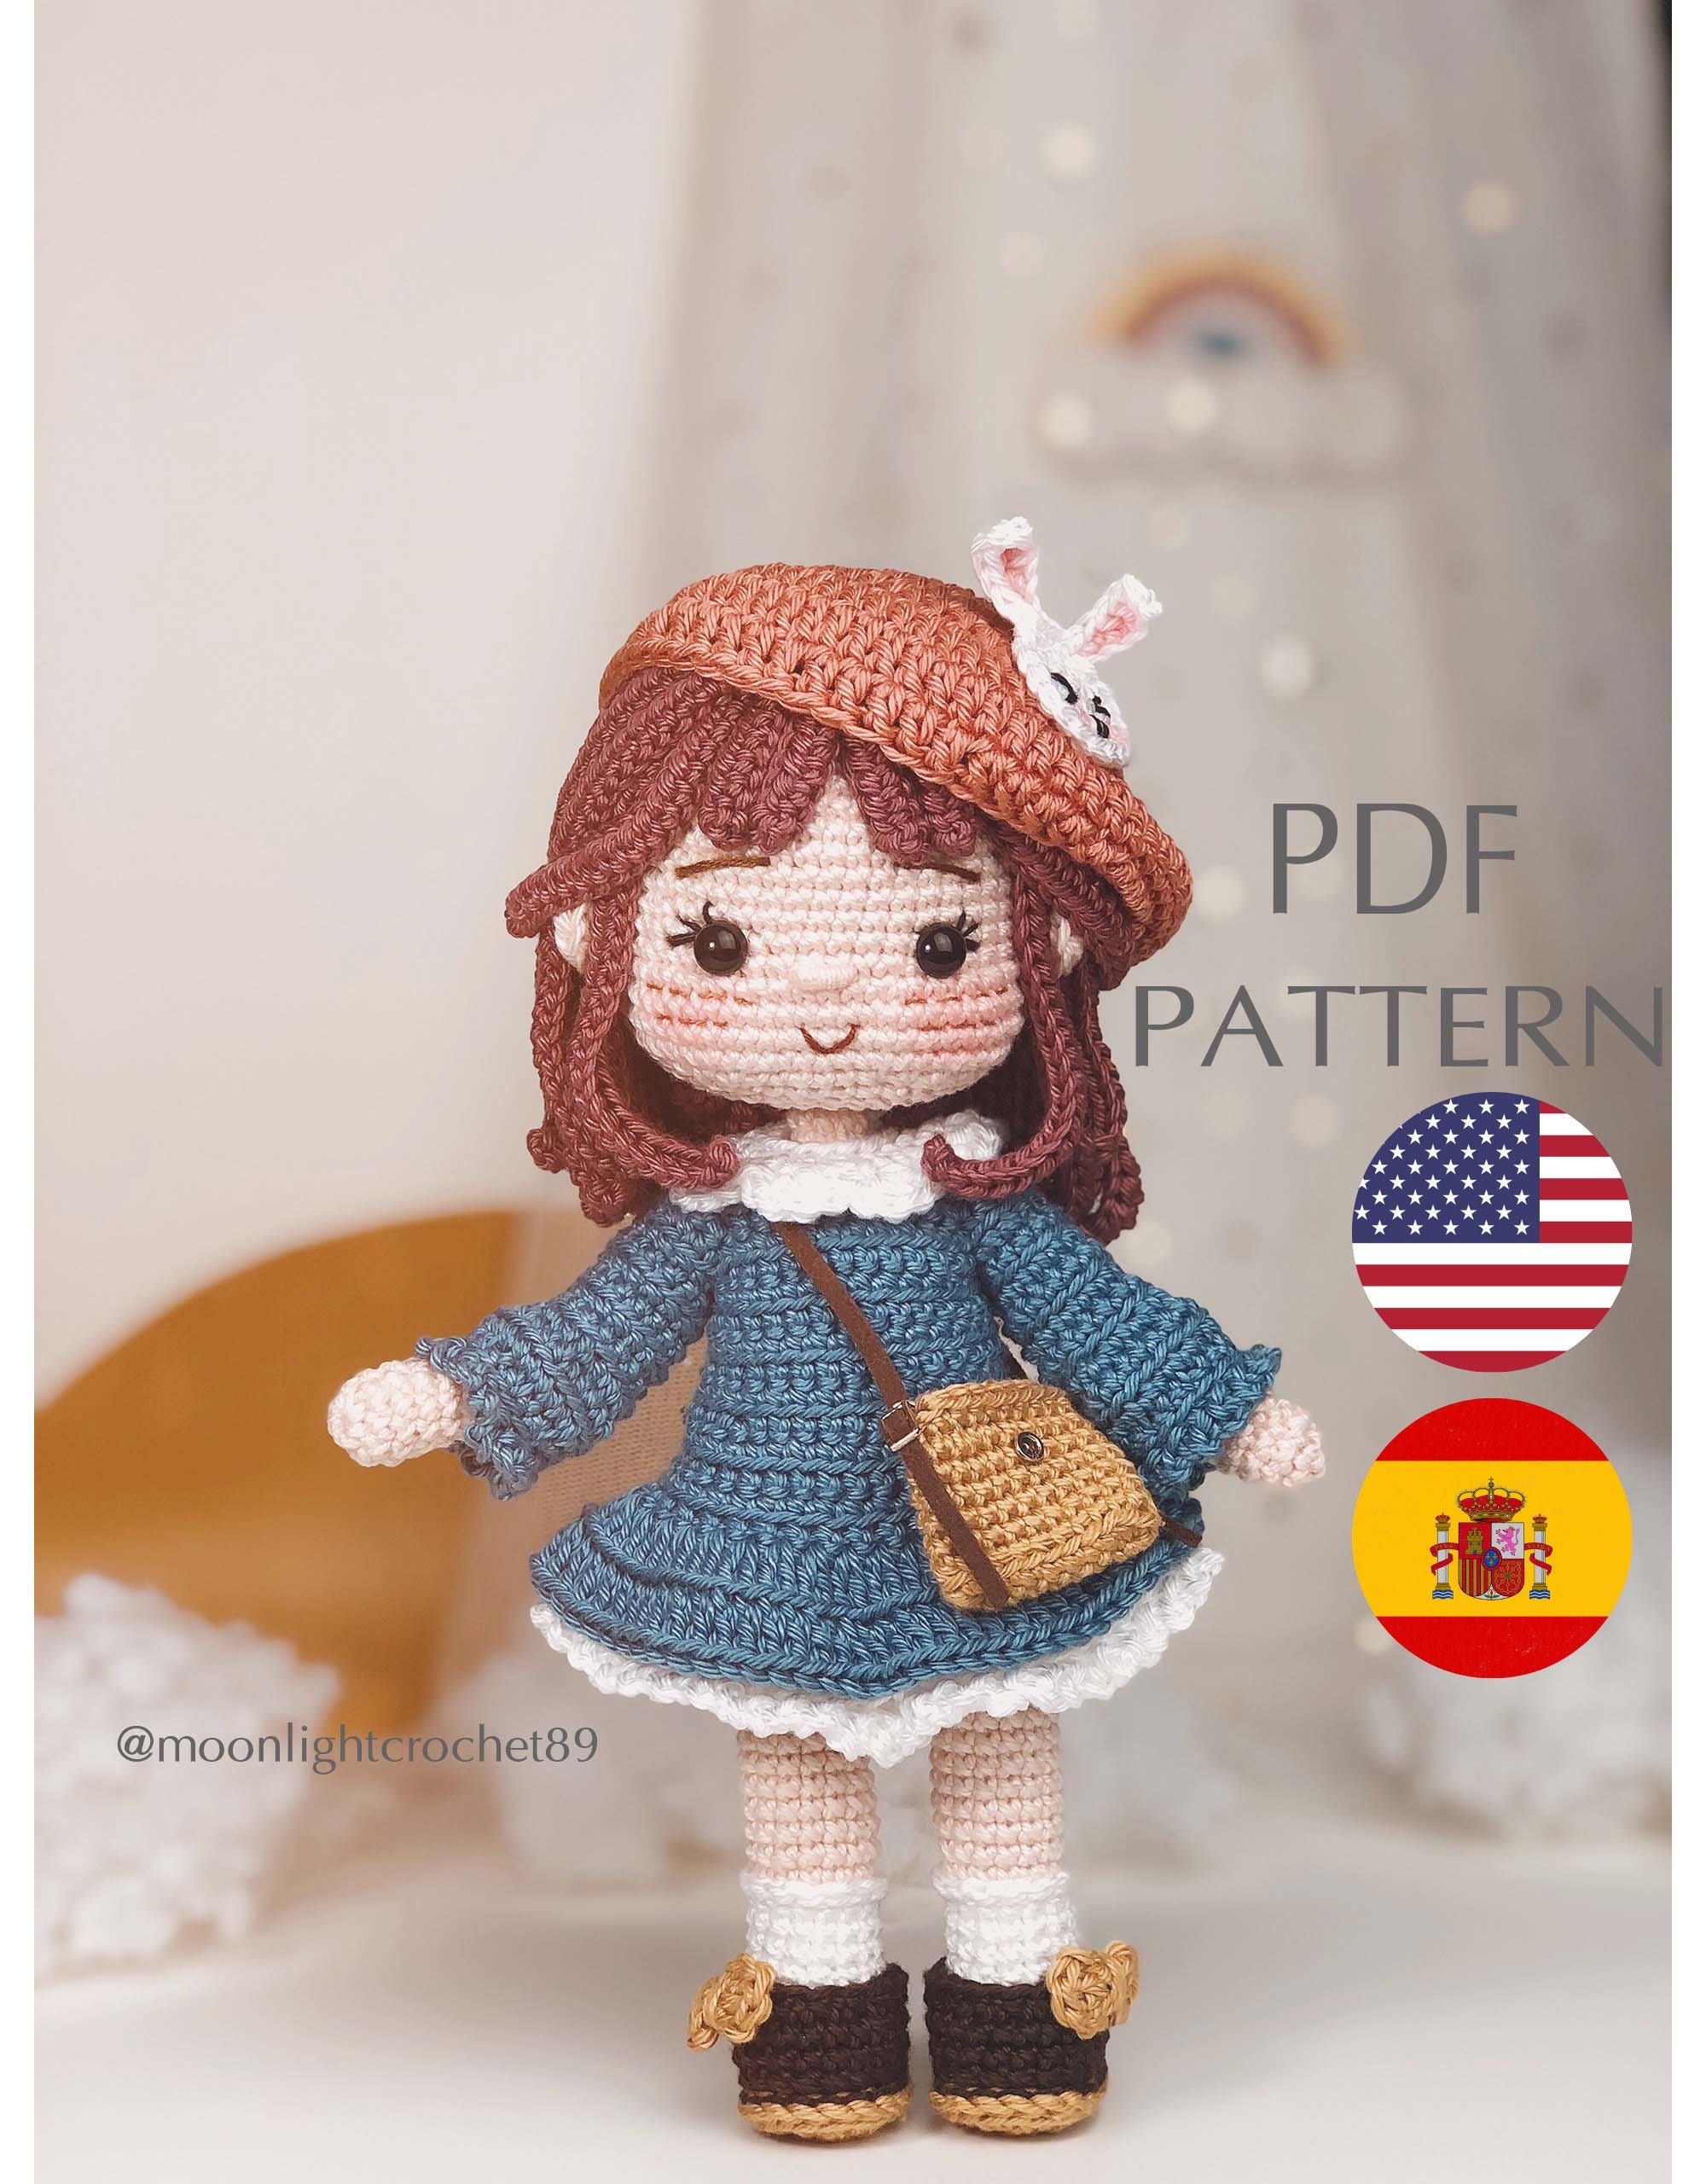 My Crochet Doll - lots of cool accessories for your own crochet doll!  CROCHET PATTERN BOOK 